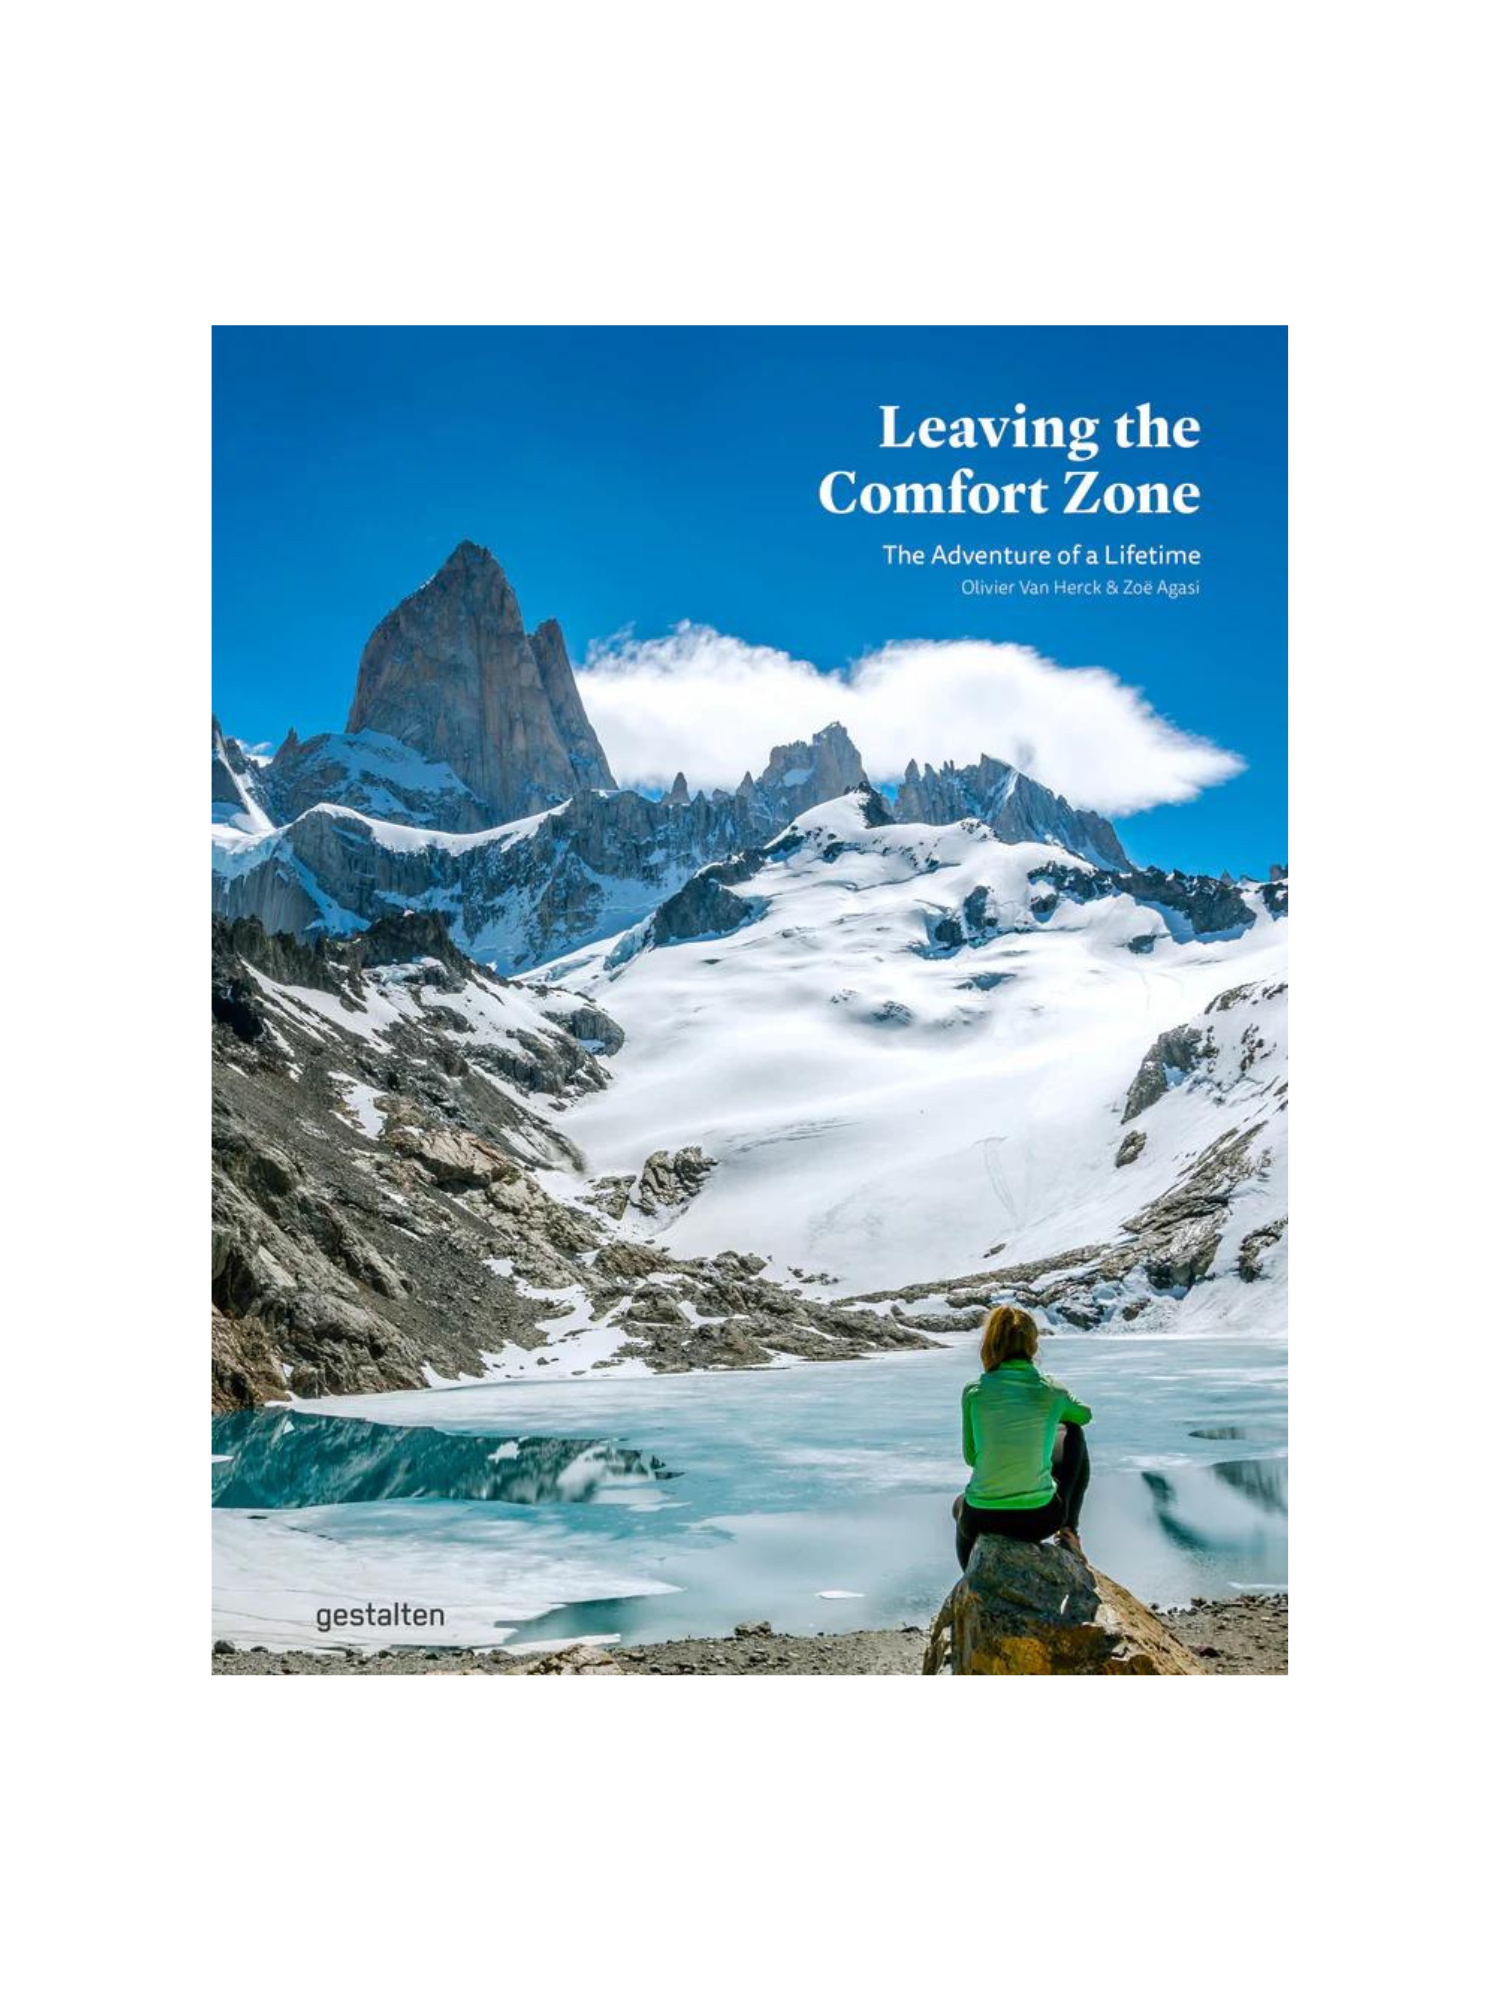 Leaving the Comfort Zone - The Adventure of a Lifetime by Olivier Van Herck & Zoë Agasi